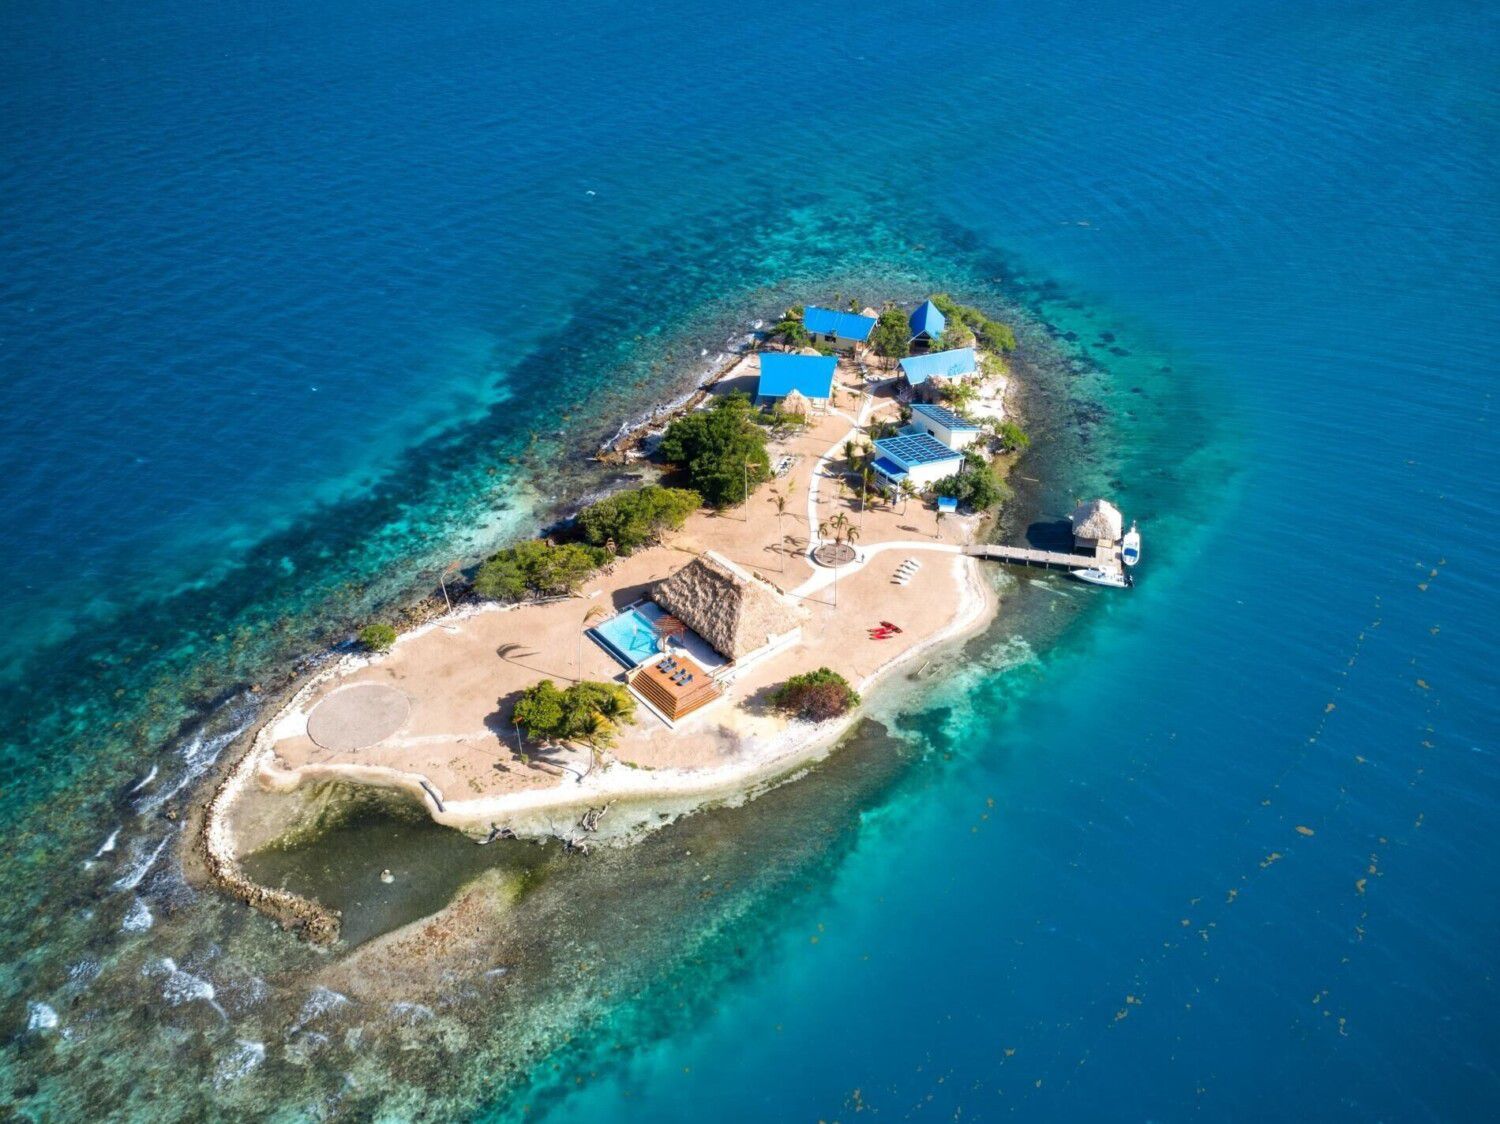 <p>Gaze upon a paradise of extraordinary beauty at this all-inclusive private island 15 minutes off the coast of Placencia, Belize. Surrounded by the crystal clear Caribbean Sea and its own live coral reef, this rare 2.2-acre coral island boasts white sandy beaches and gentle waves lapping against its shores.</p><p>Enjoy five 1,000-plus-square-foot villas and luxury treatment like chef-prepared meals, concierge services and on-site massages. The heart of Kanu is the massive thatch-roofed central palapa with a large swimming pool, communal kitchen, bar, and living area.</p><p><a href="https://www.vrbo.com/1510149?adultsCount=5&arrival=2023-04-14&departure=2023-04-16">This certified Gold Standard Property</a> starts at $5,560 a night for up to 20 people.</p>